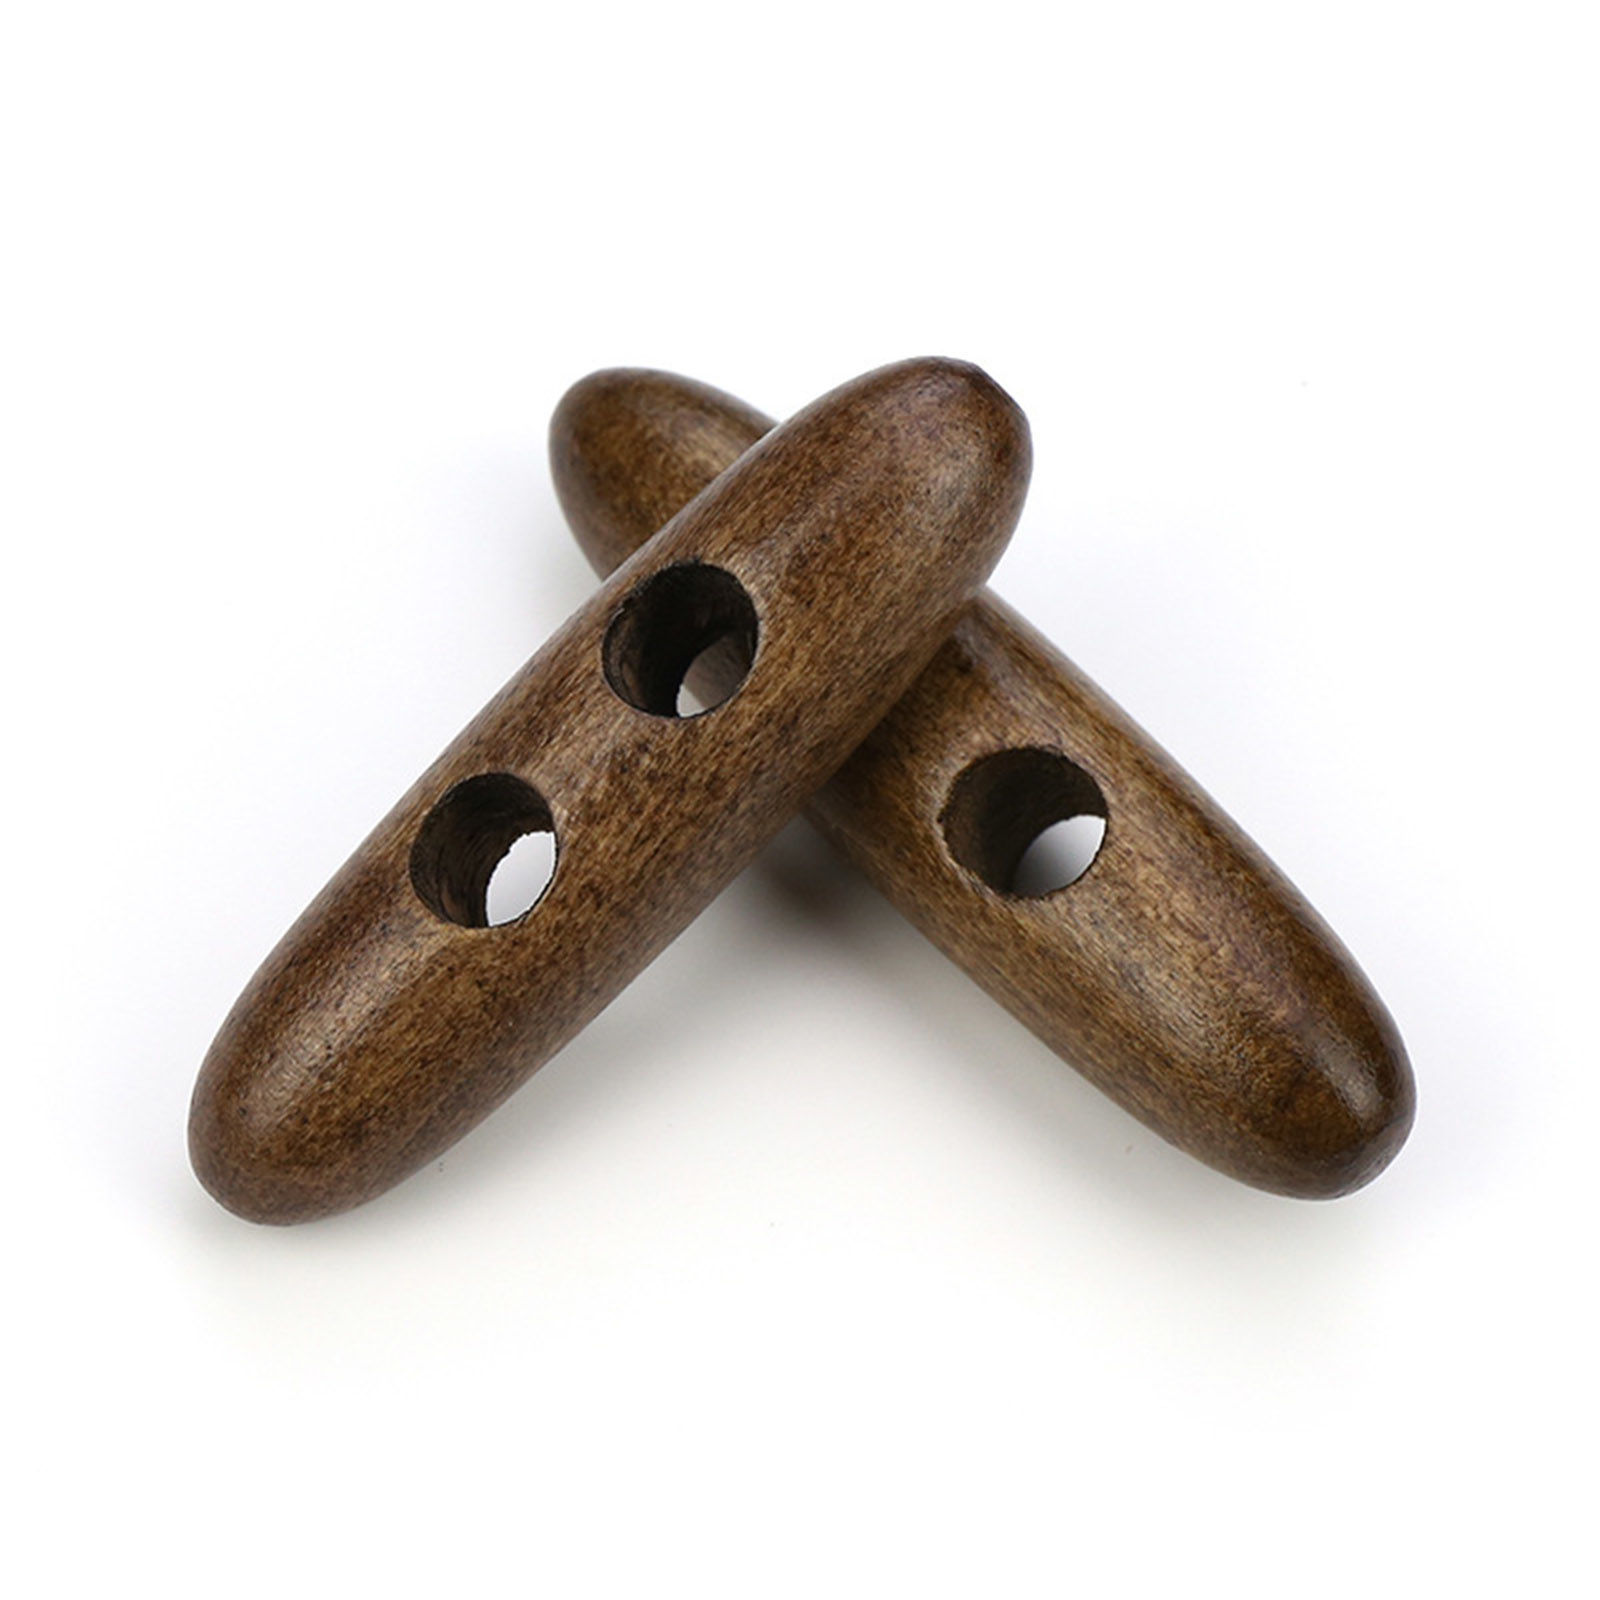 Picture of Wood Horn Buttons Scrapbooking 2 Holes Marquise Coffee 3.5cm long, 50 PCs